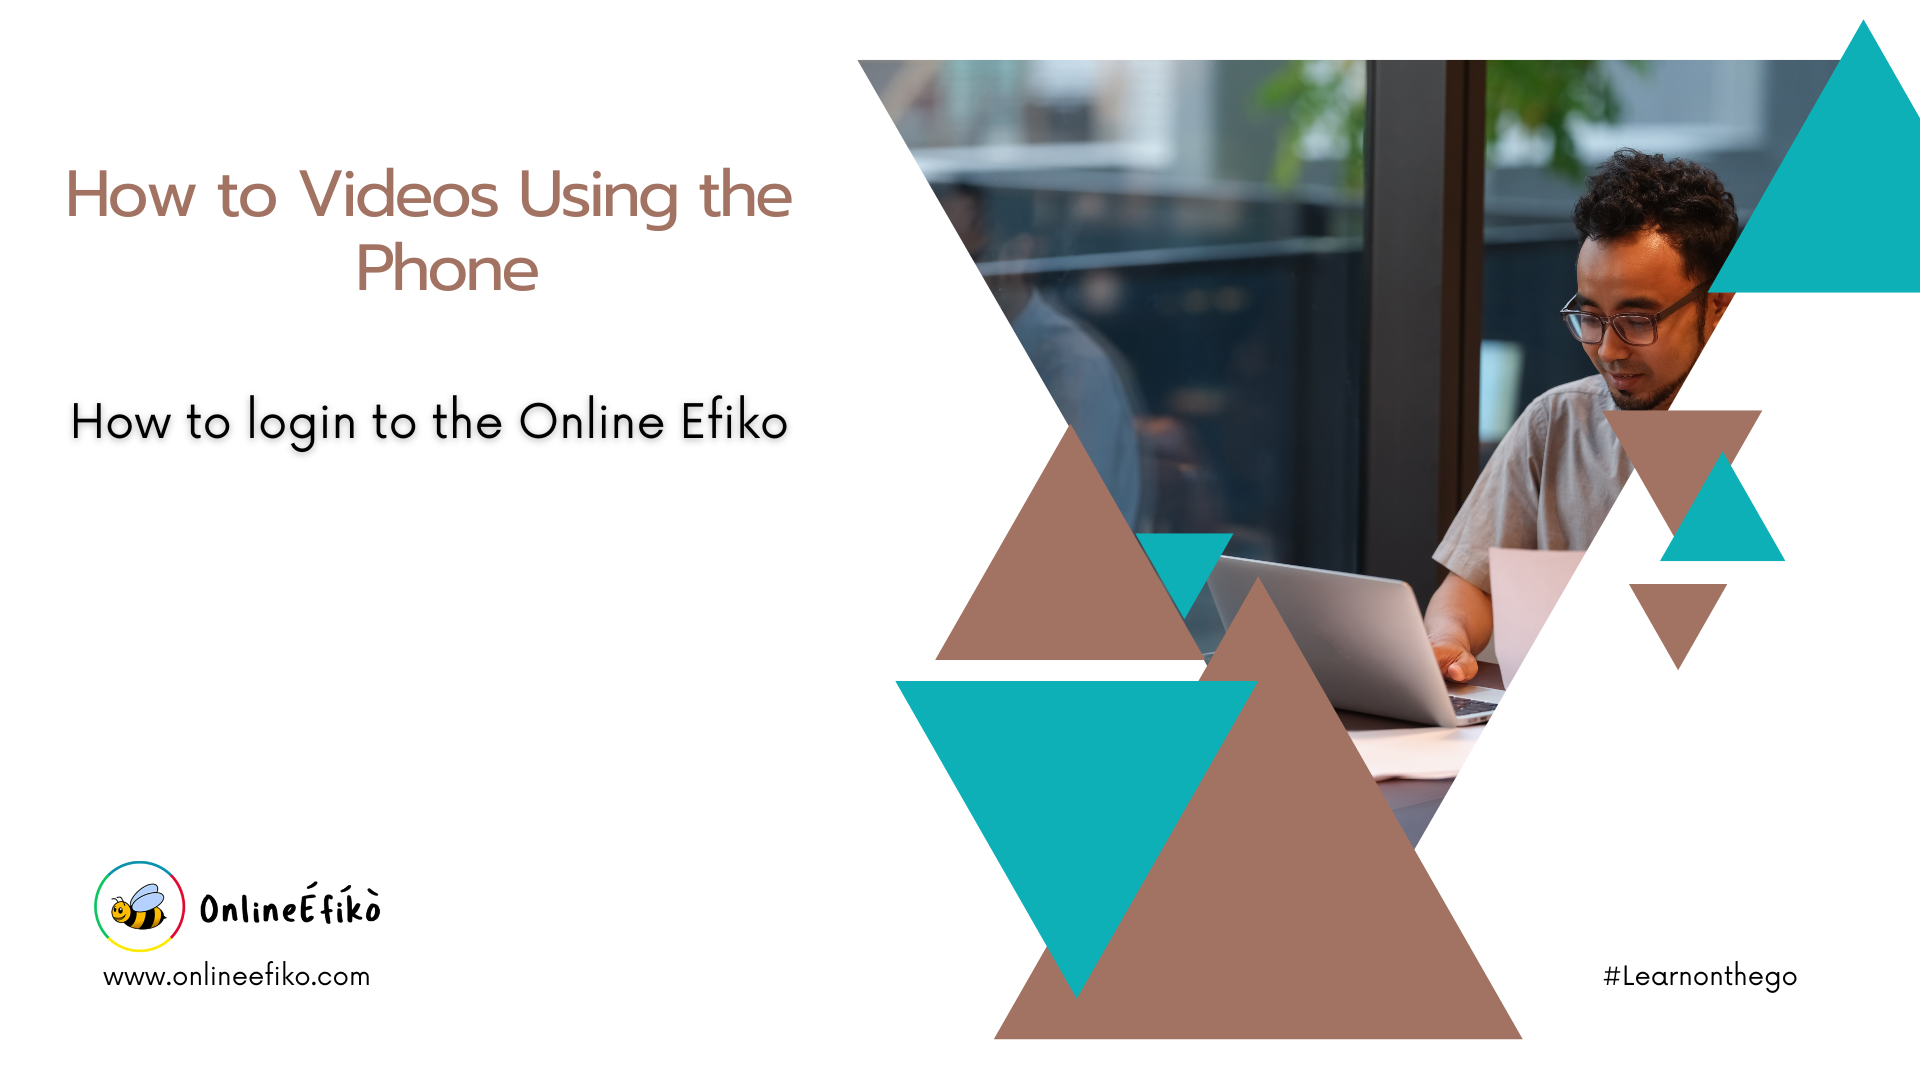 How to login to the Online Efiko